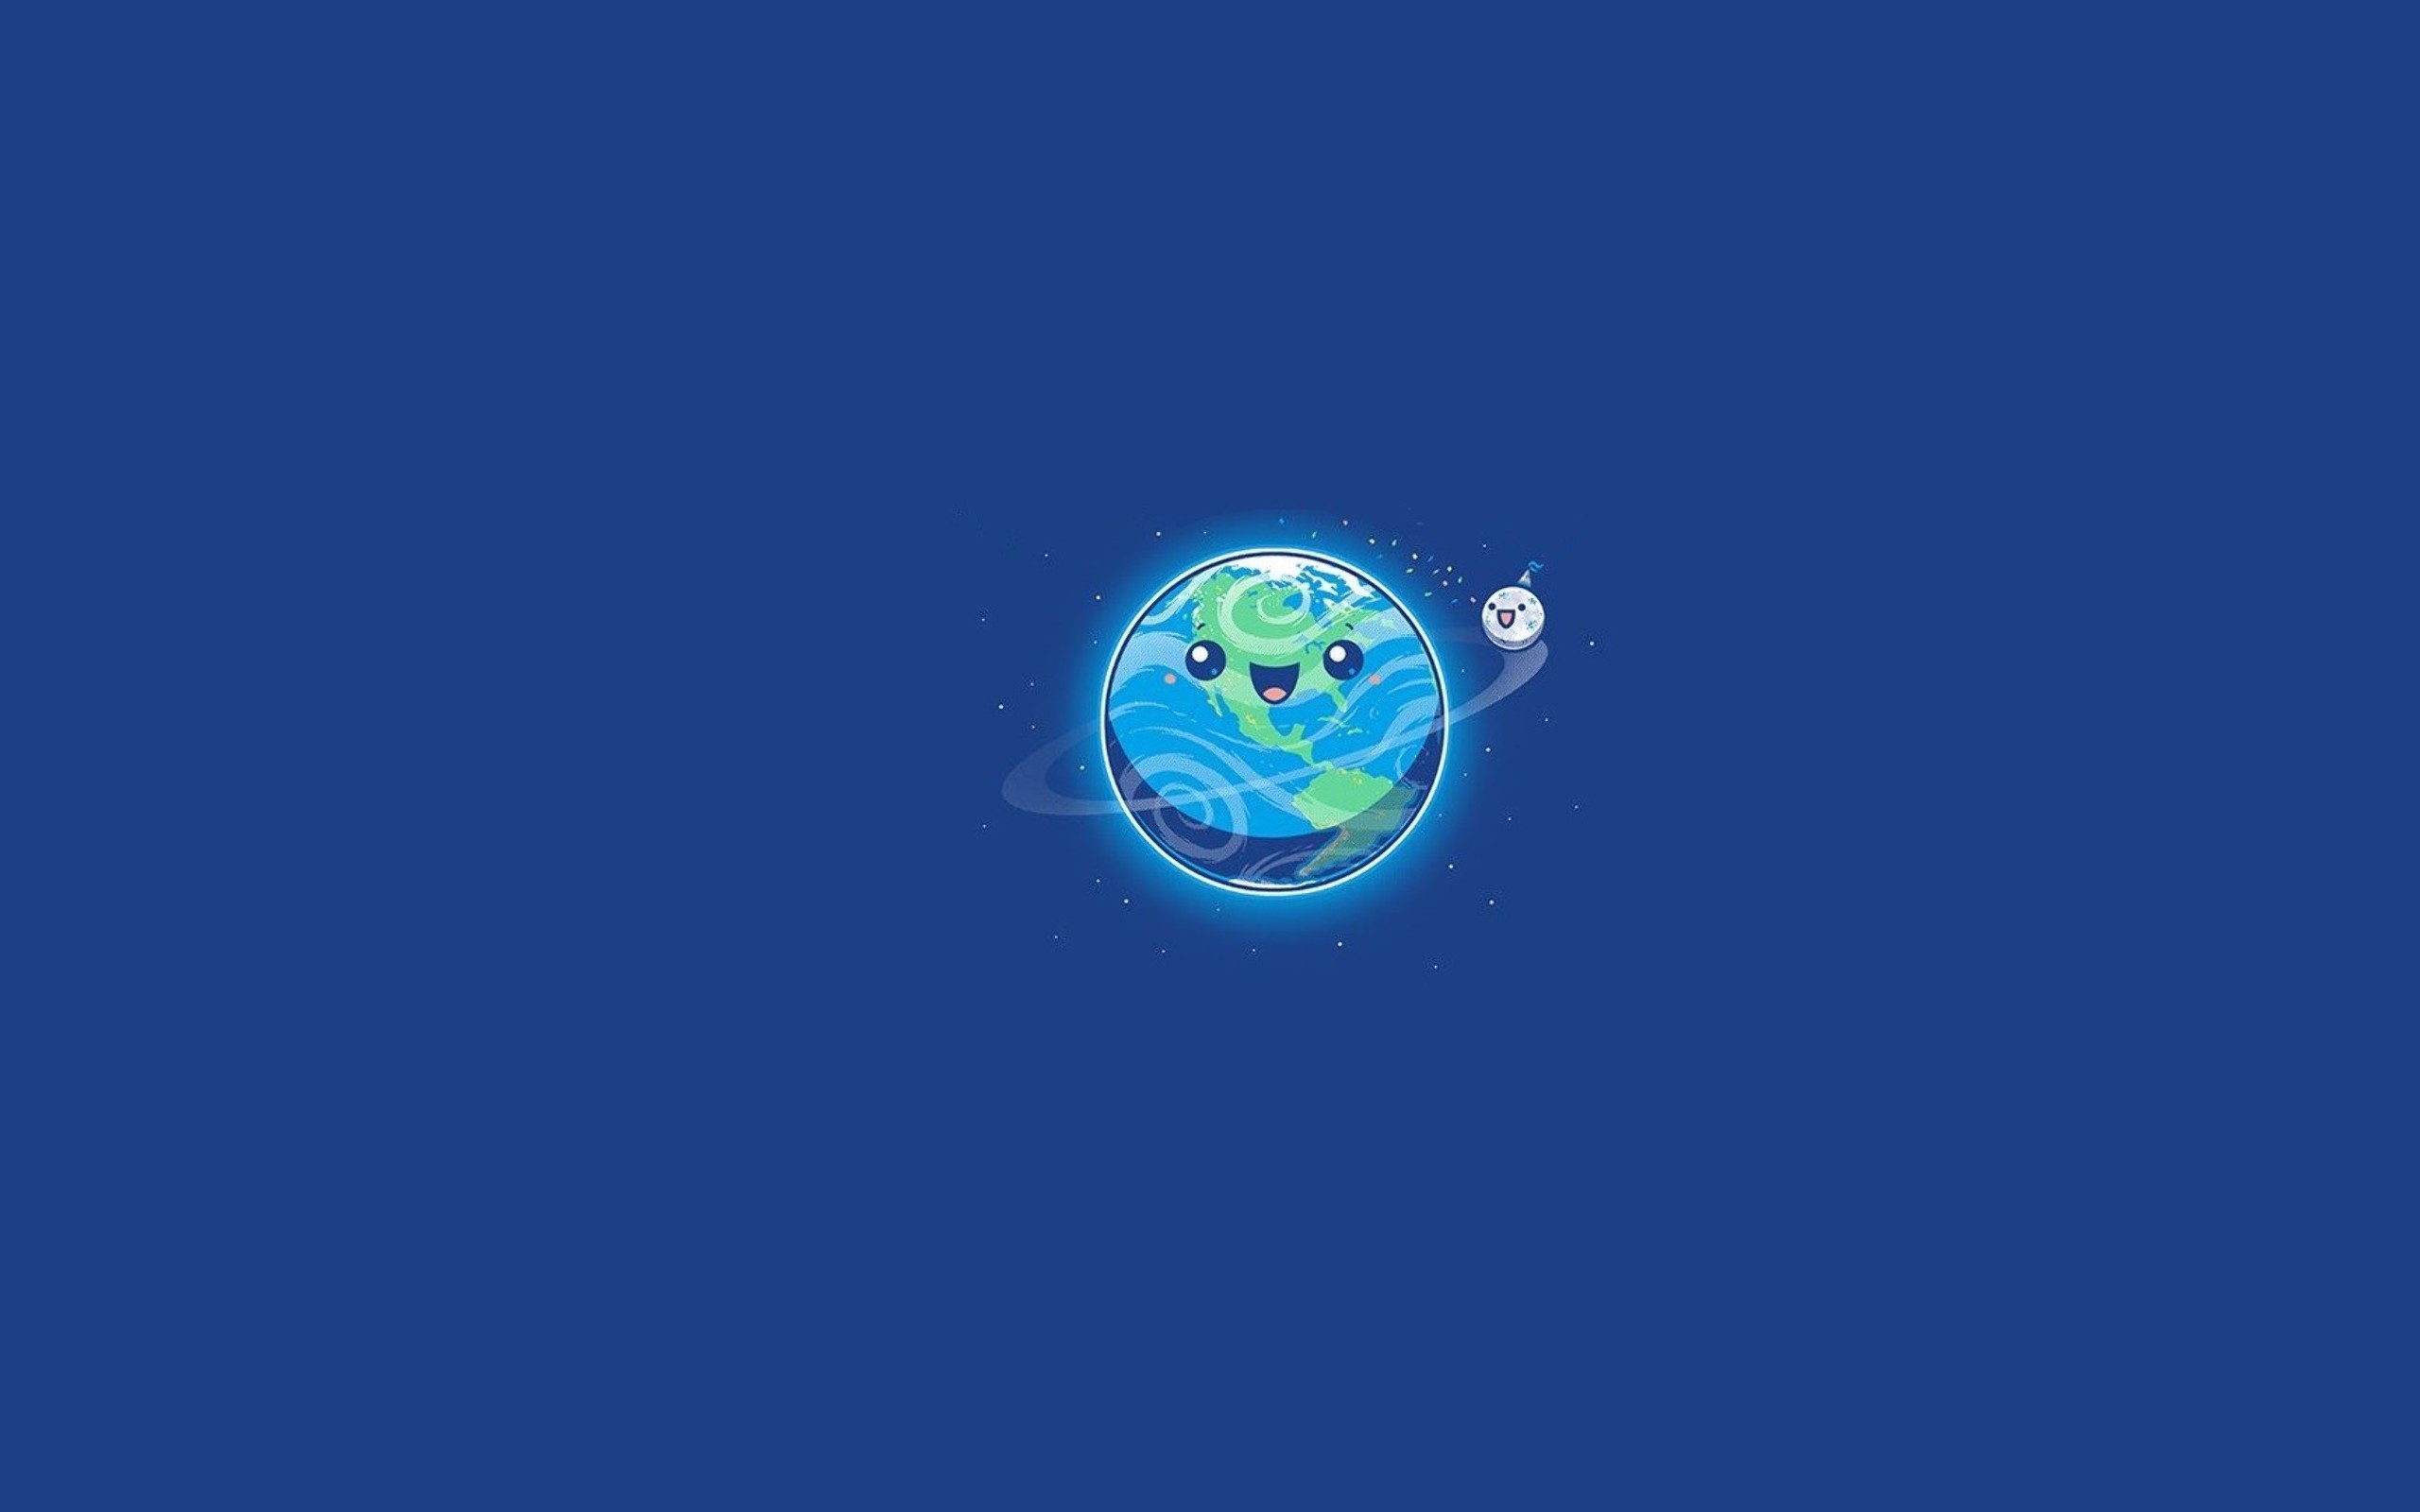 General 2560x1600 Earth Moon minimalism space smiling planet simple background blue background humor